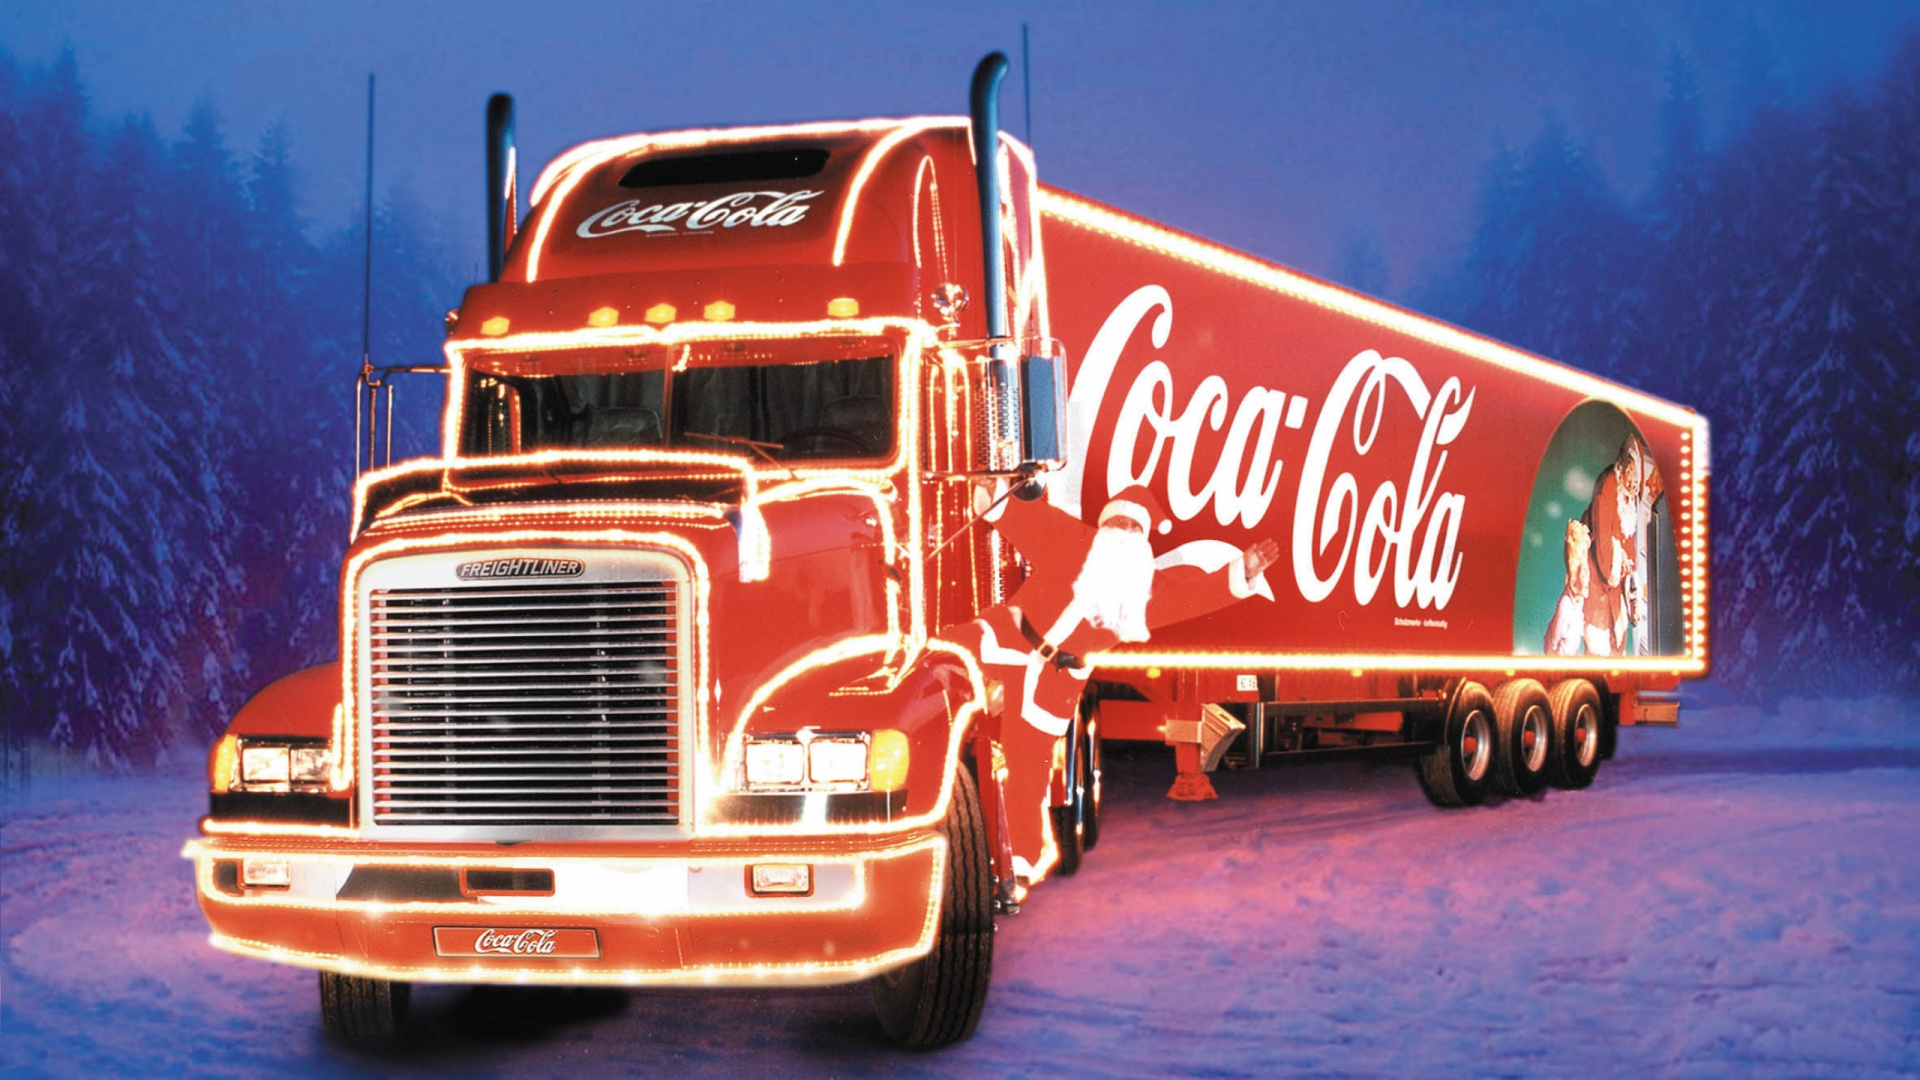 Red and White Coca Cola Truck. Wallpaper in 1920x1080 Resolution